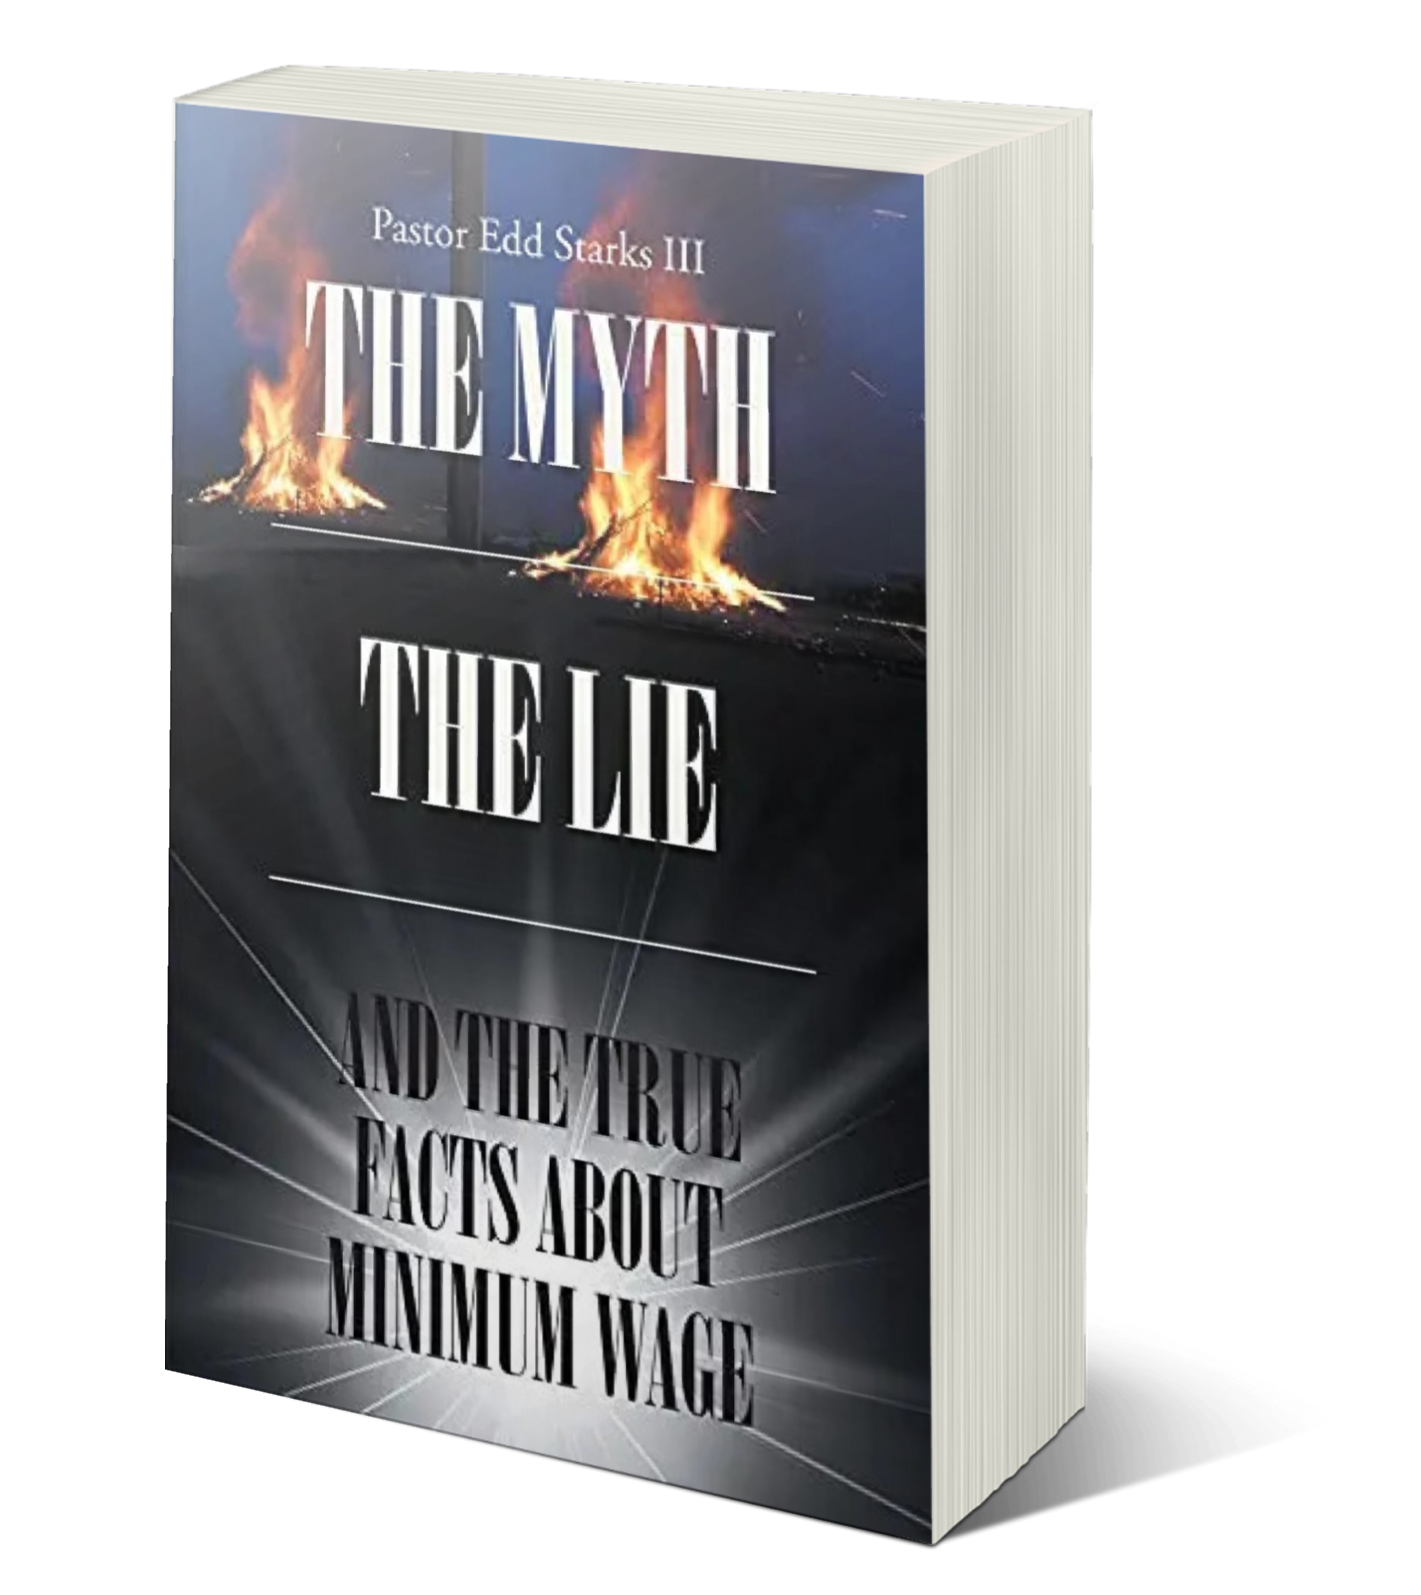 Art for Pastor Edd Starks III The Myth the Lie and the True Facts about Minimum Wage by Pastor Edd Starks III